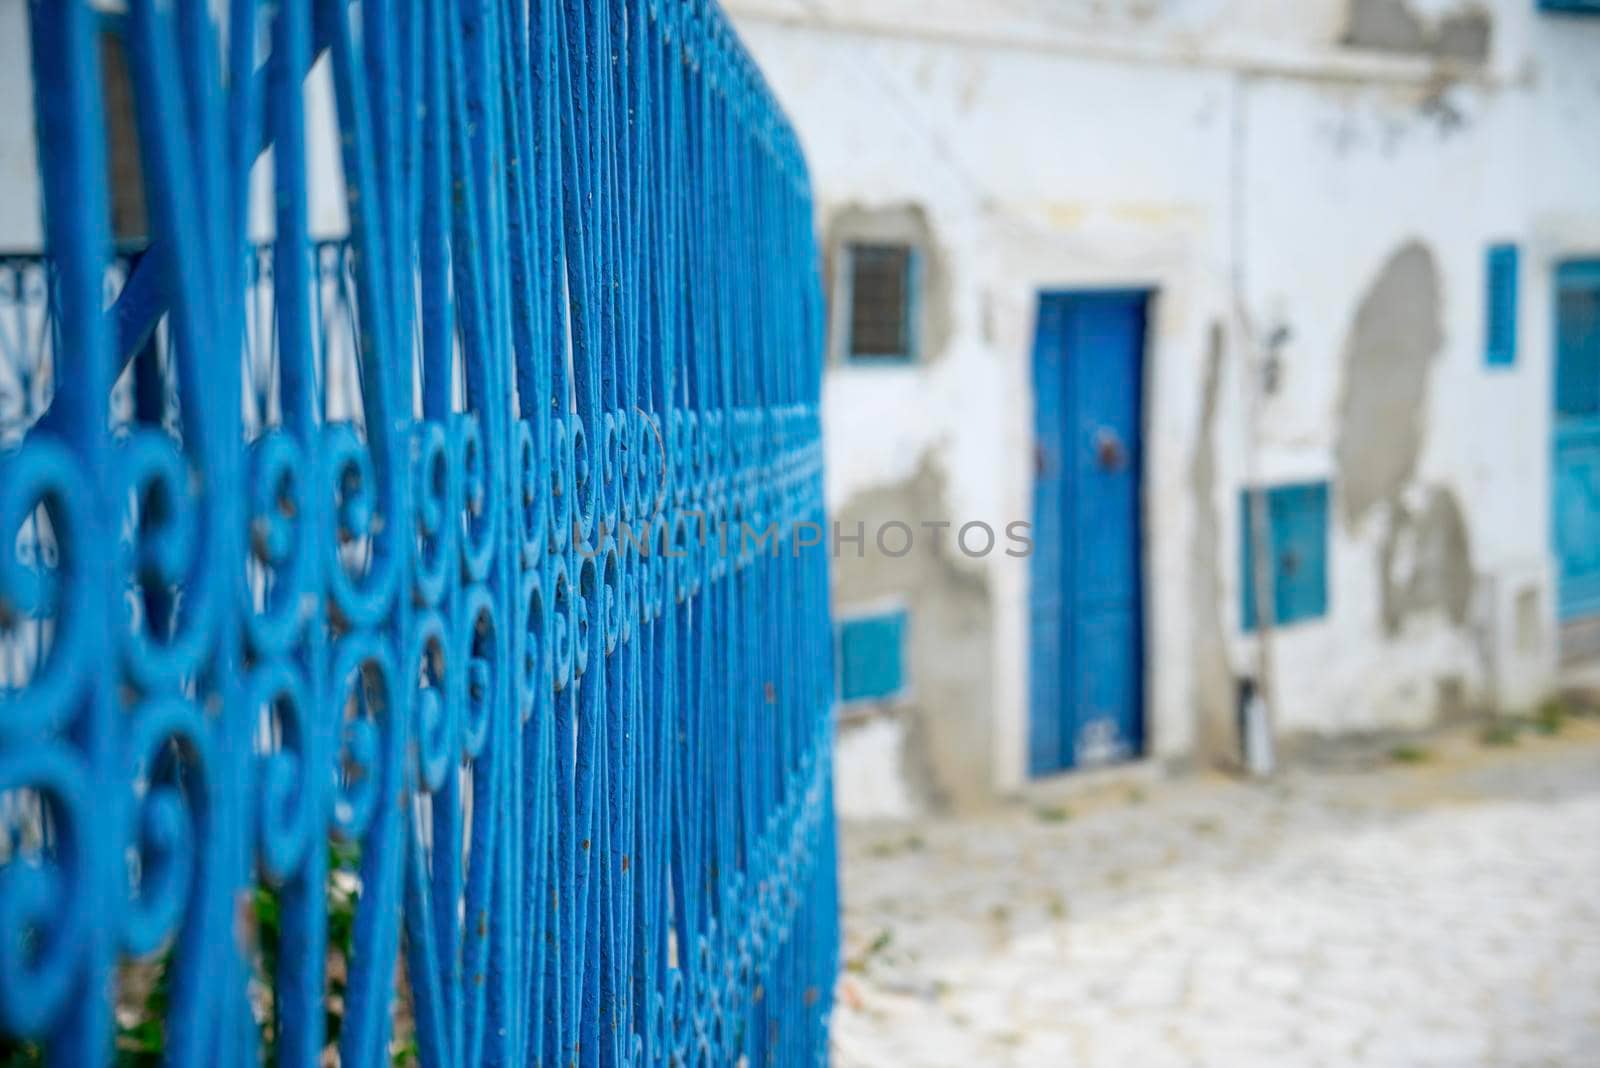 Aged Blue doors and windows in Andalusian style from Sidi Bou Said in Tunisia